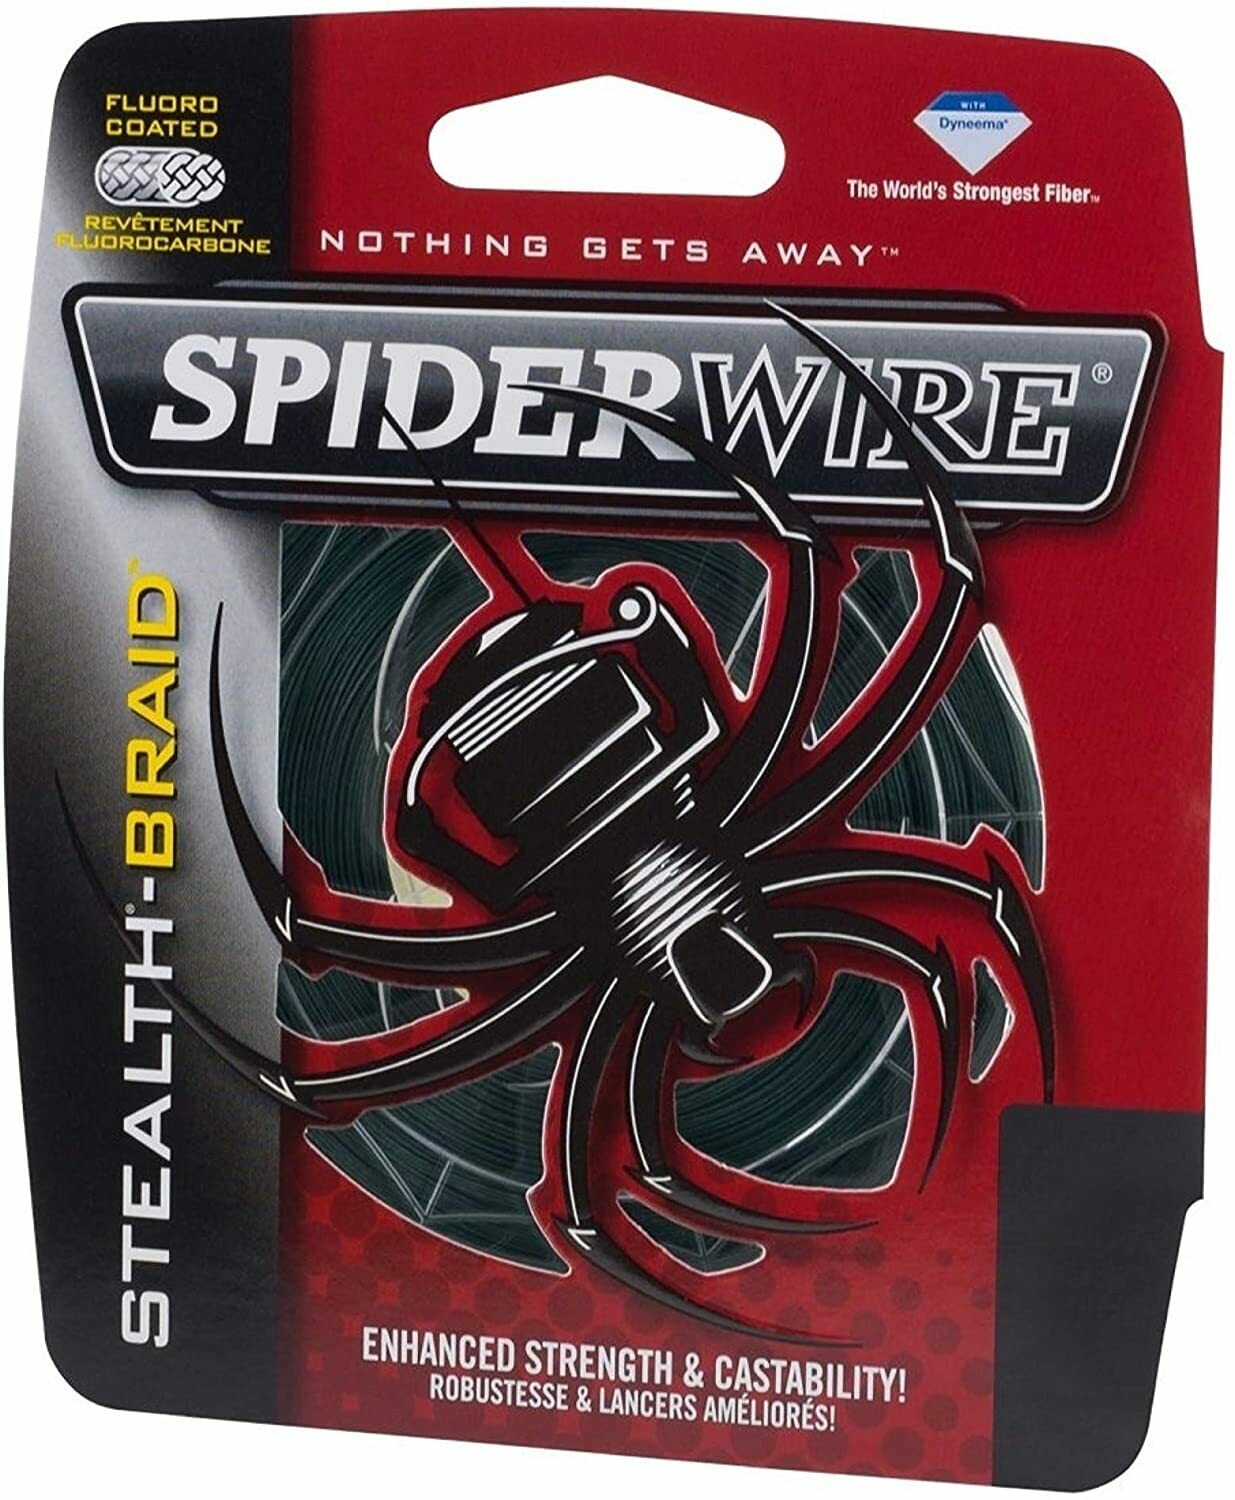 Spider Wire Stealth Braid Fishing Line, Moss Green, 125 or 300 yd